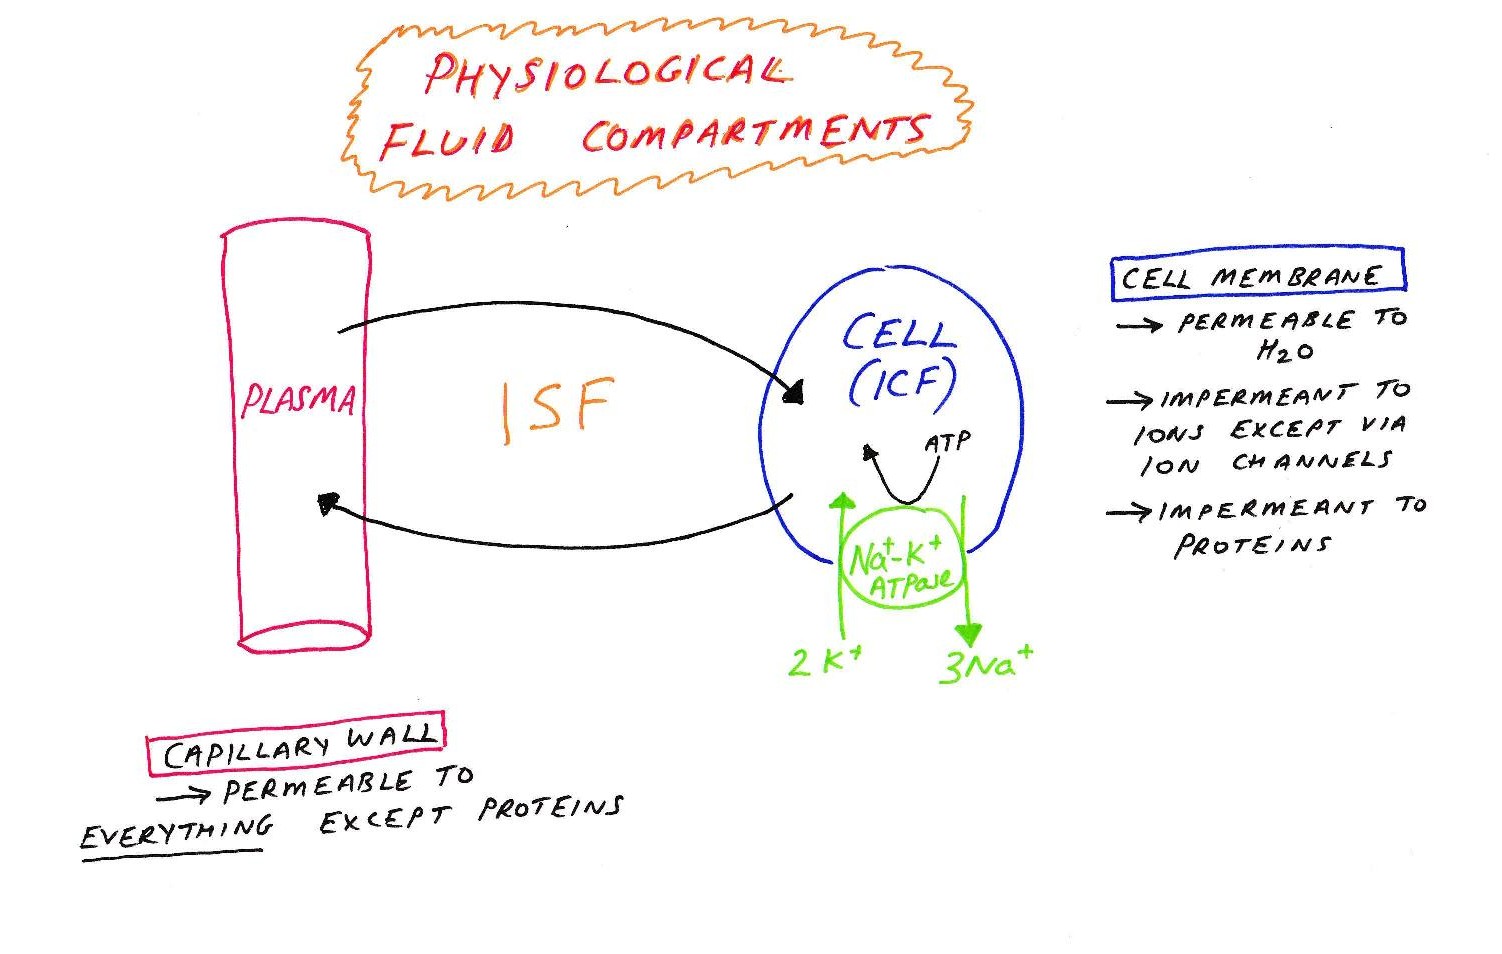 body fluid compartments physiology